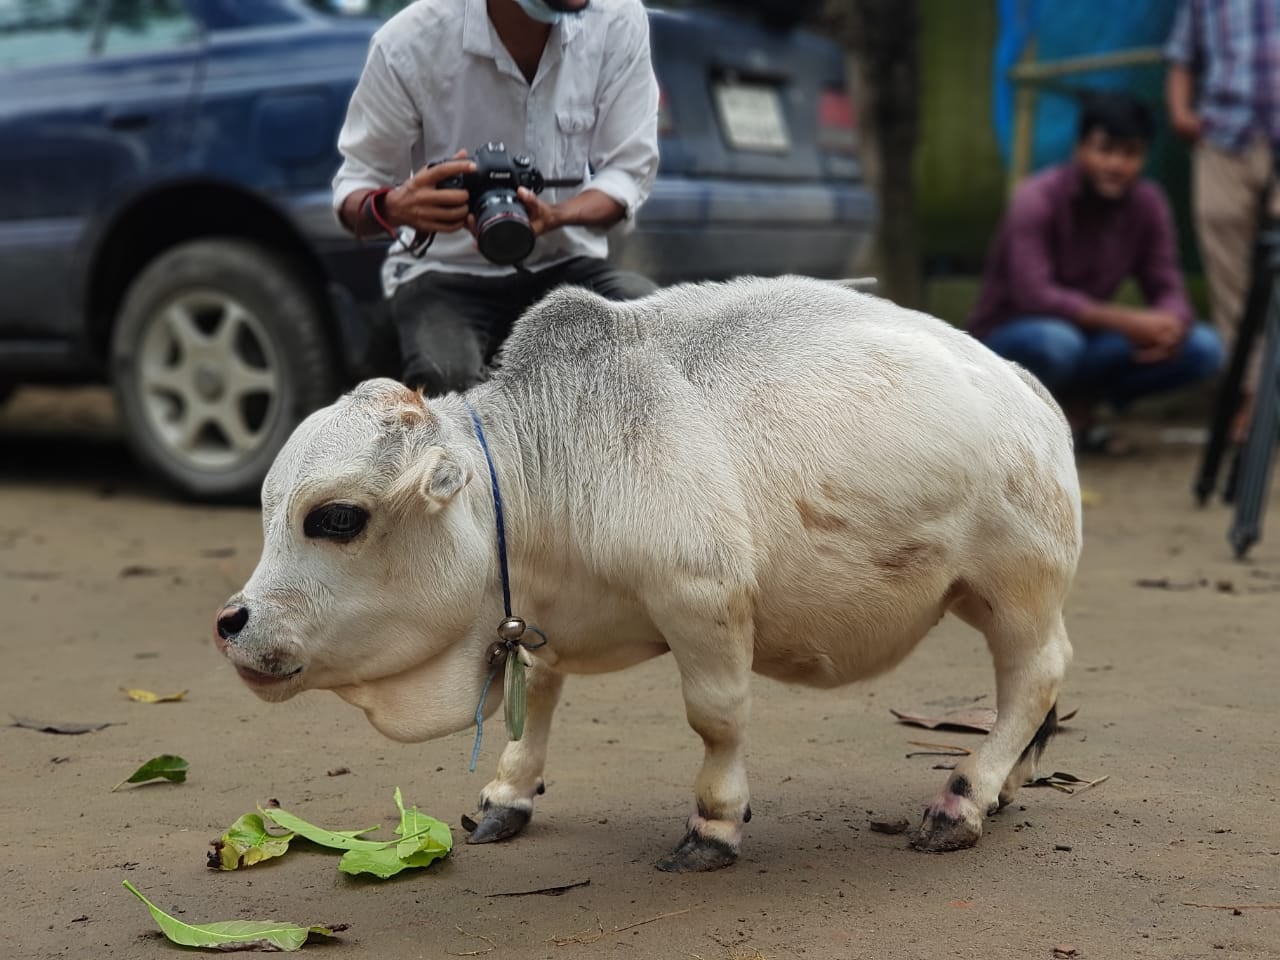 People take pictures of a dwarf cow named Rani at a farm in Bangladesh